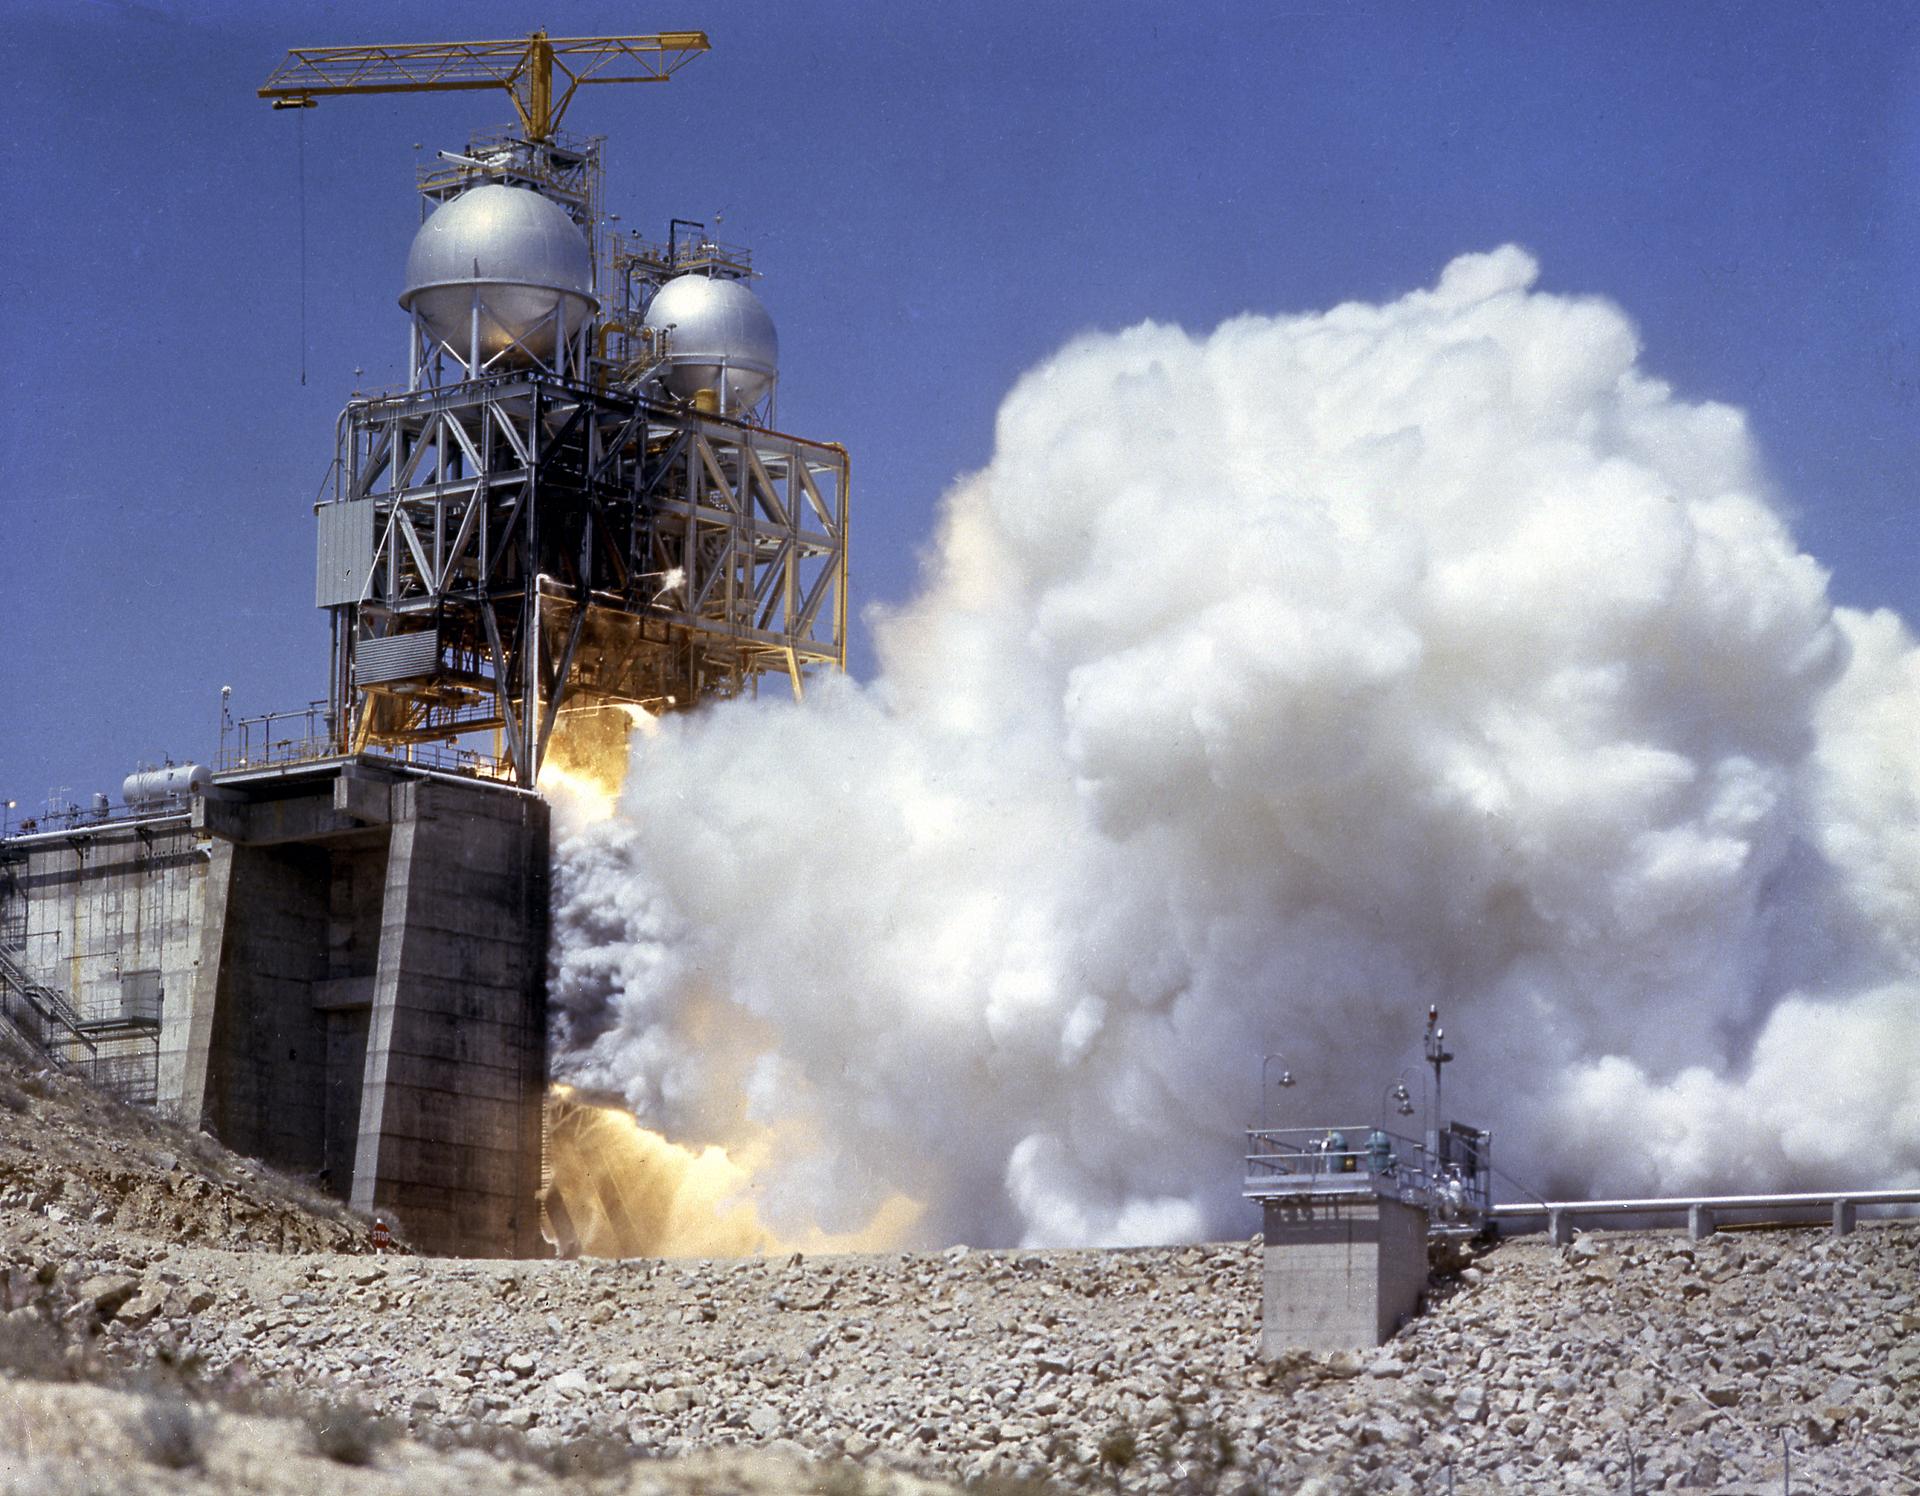 Test Stand 1-C during a test-firing of an F-1 engine in 1962. (Source: NASA)